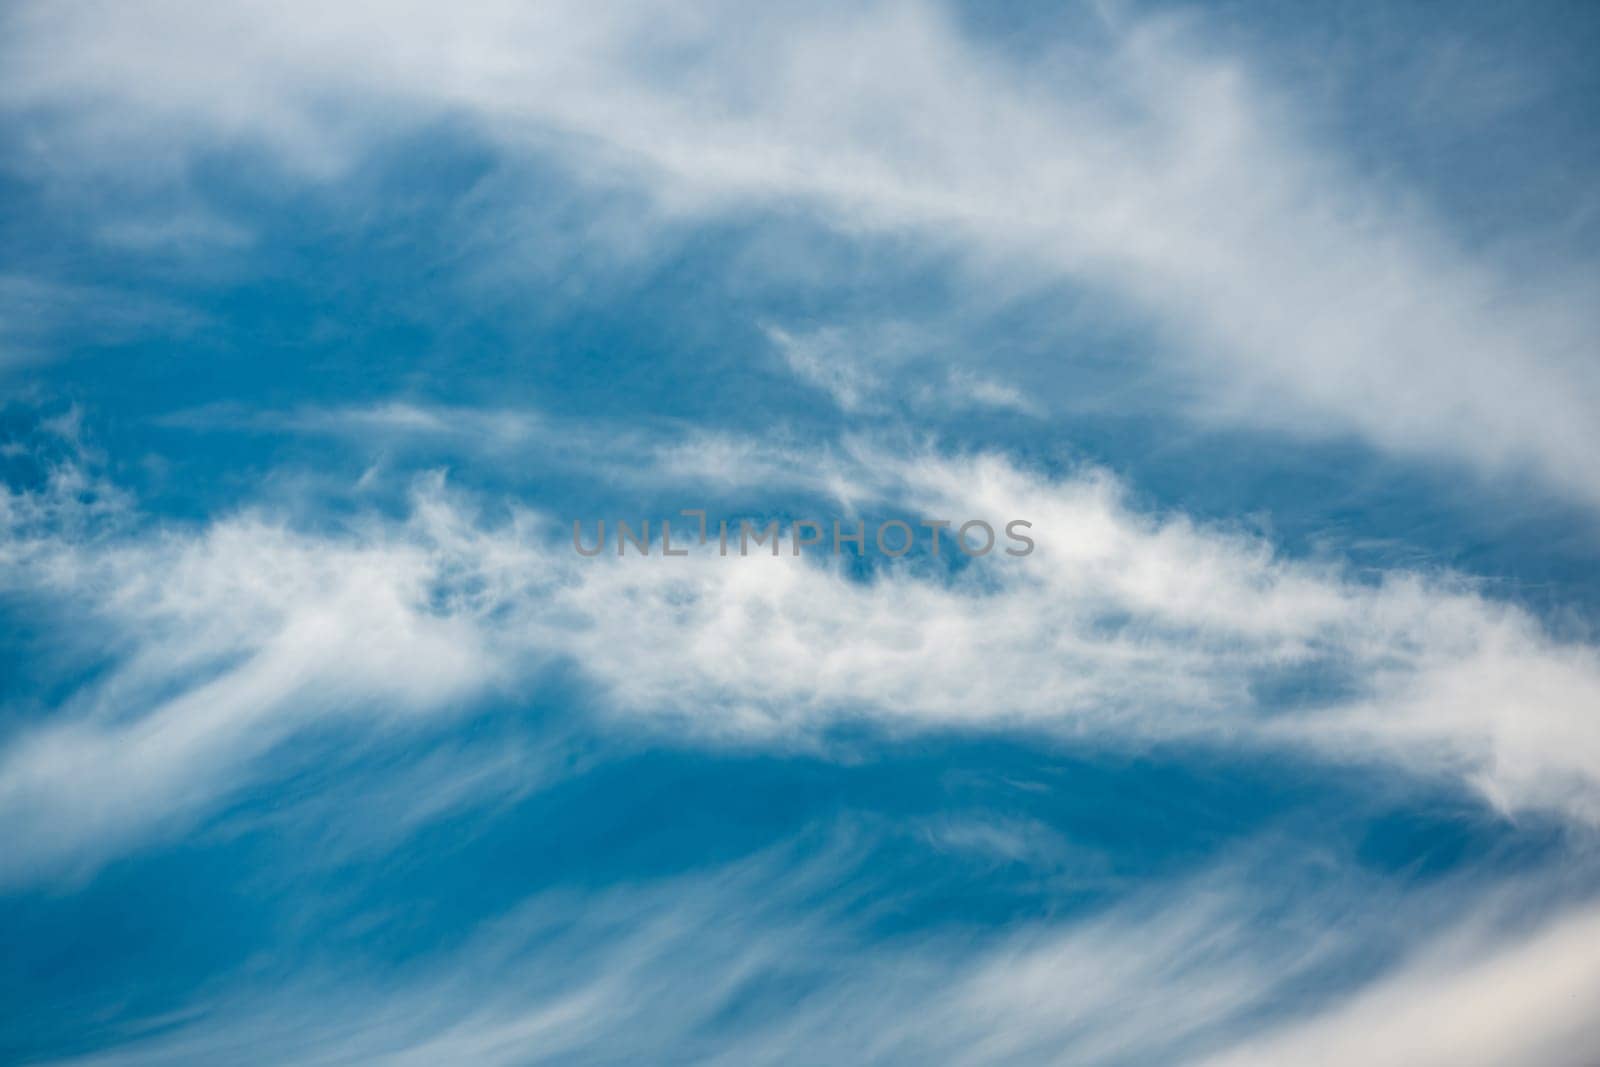 Photograph of prominent clouds in a blue sky in sunlight, taken with a polarizing filter by Sonat